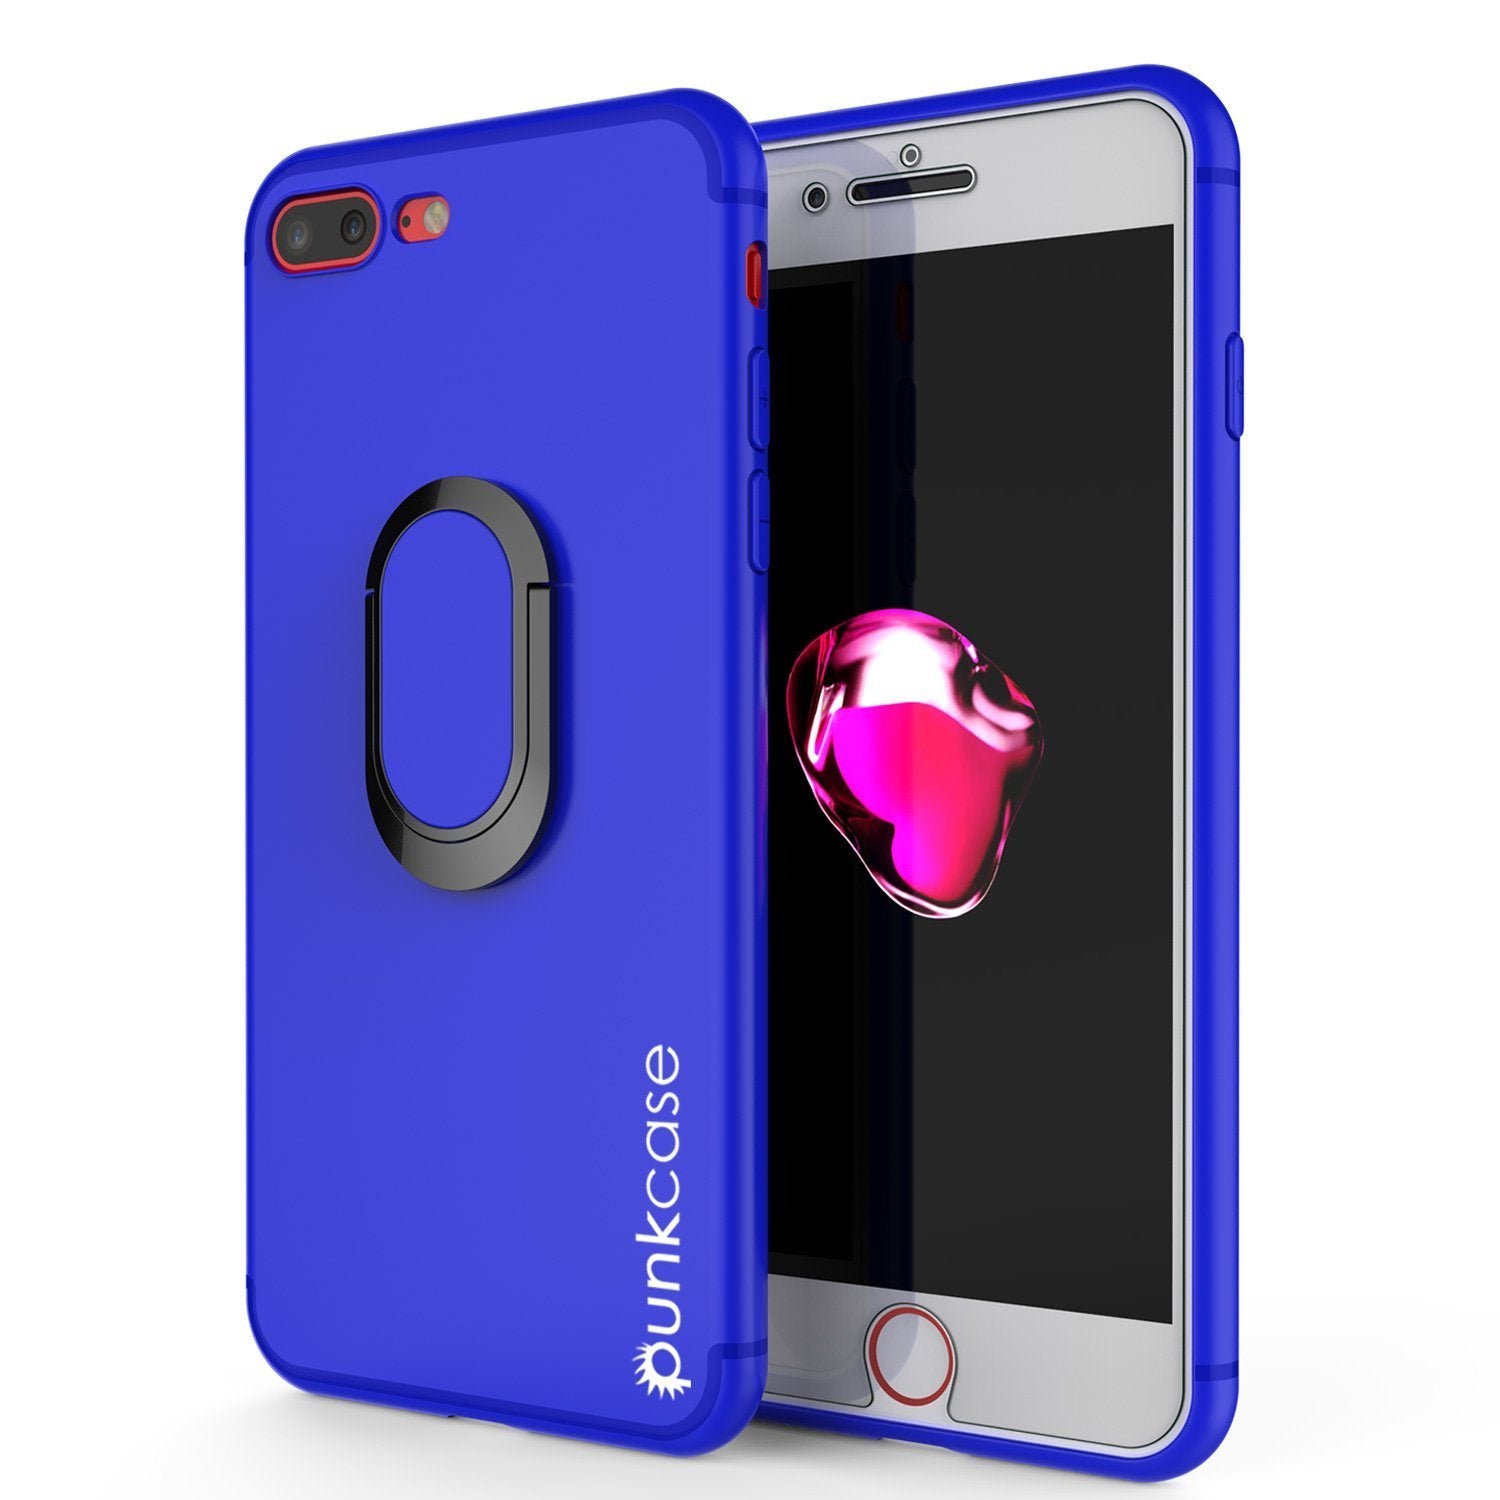 iPhone 8 PLUS Case, Punkcase Magnetix Protective TPU Cover W/ Kickstand, Tempered Glass Screen Protector [Blue] - PunkCase NZ